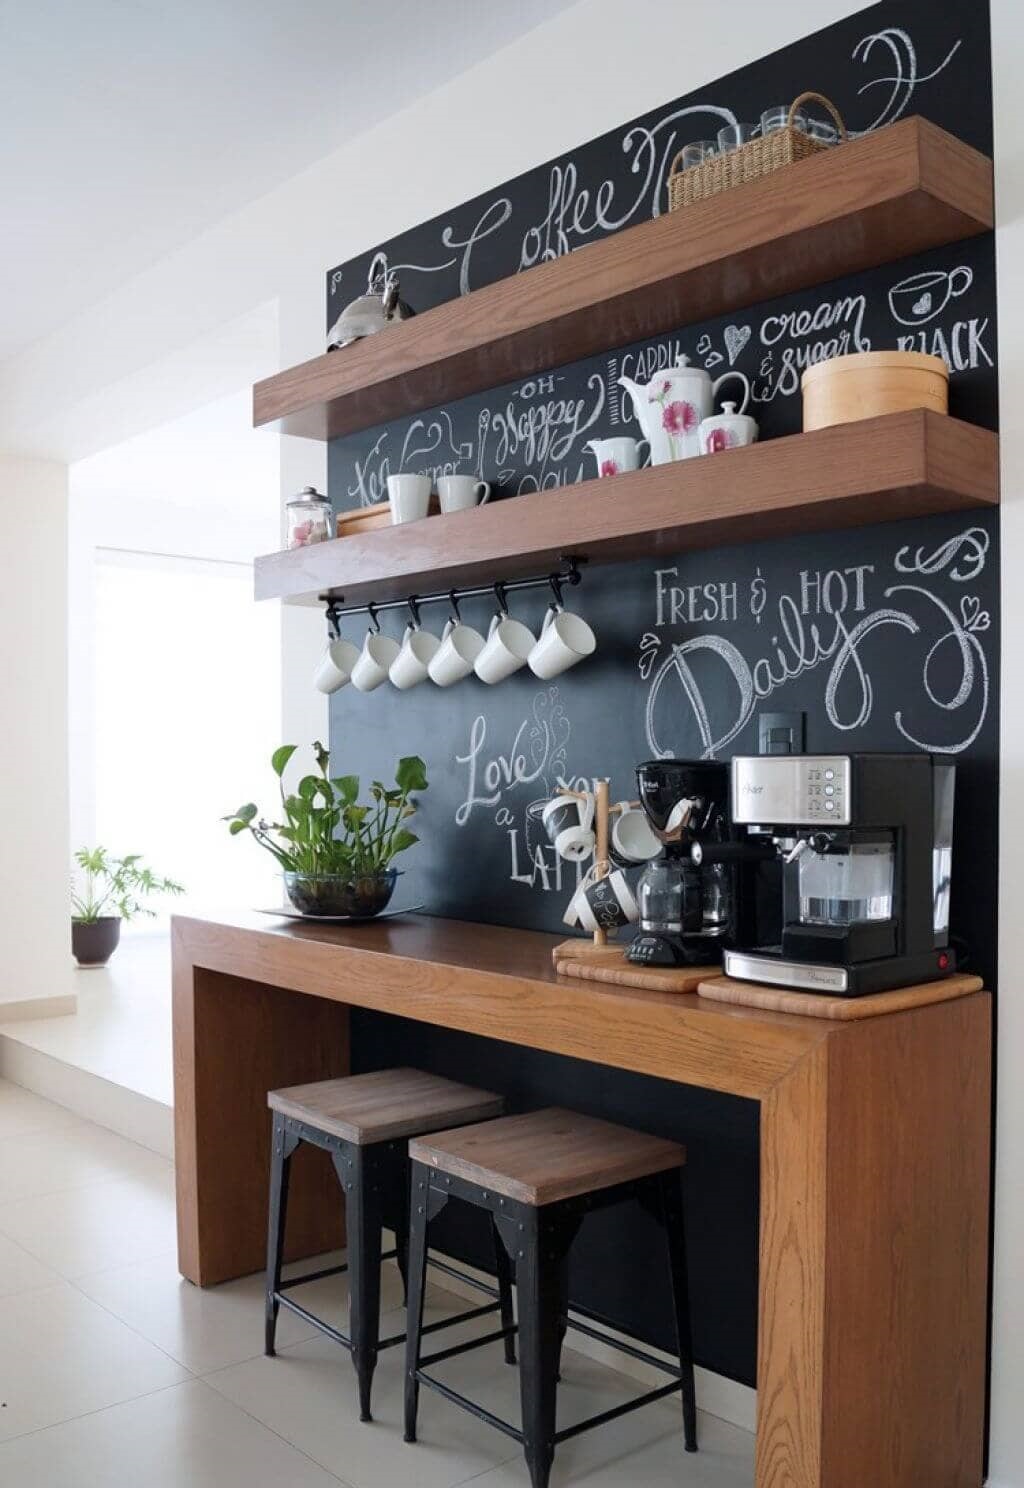 22 coffee cup holder ideas to declutter your kitchen - 71